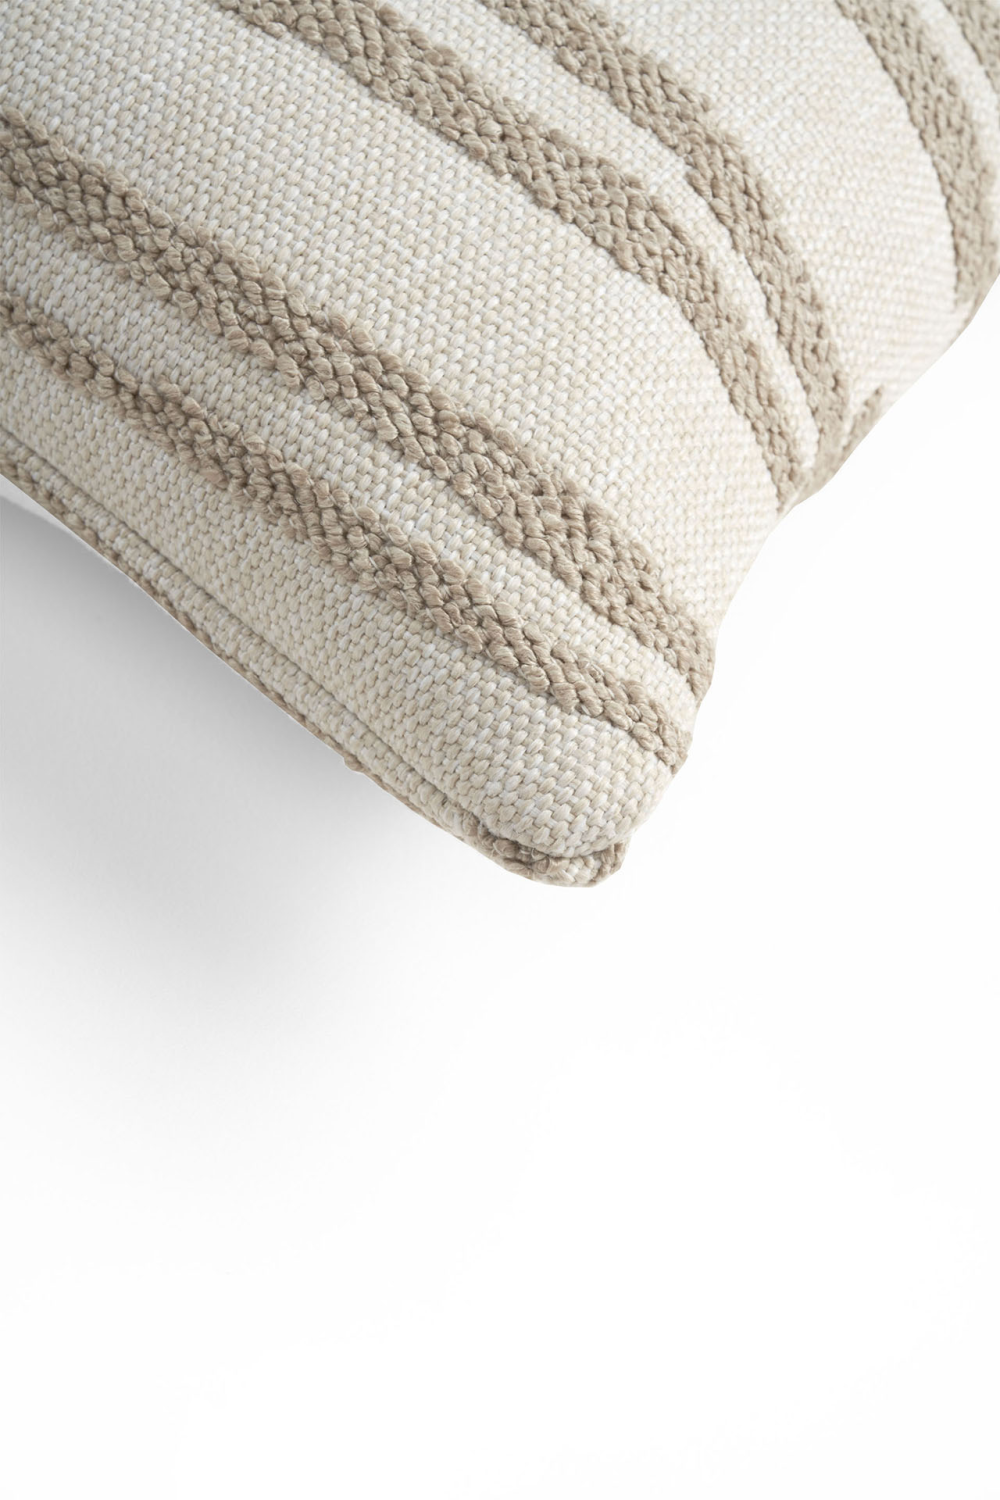 Printed Outdoor Cushions (2) | Ethnicraft White | OROA